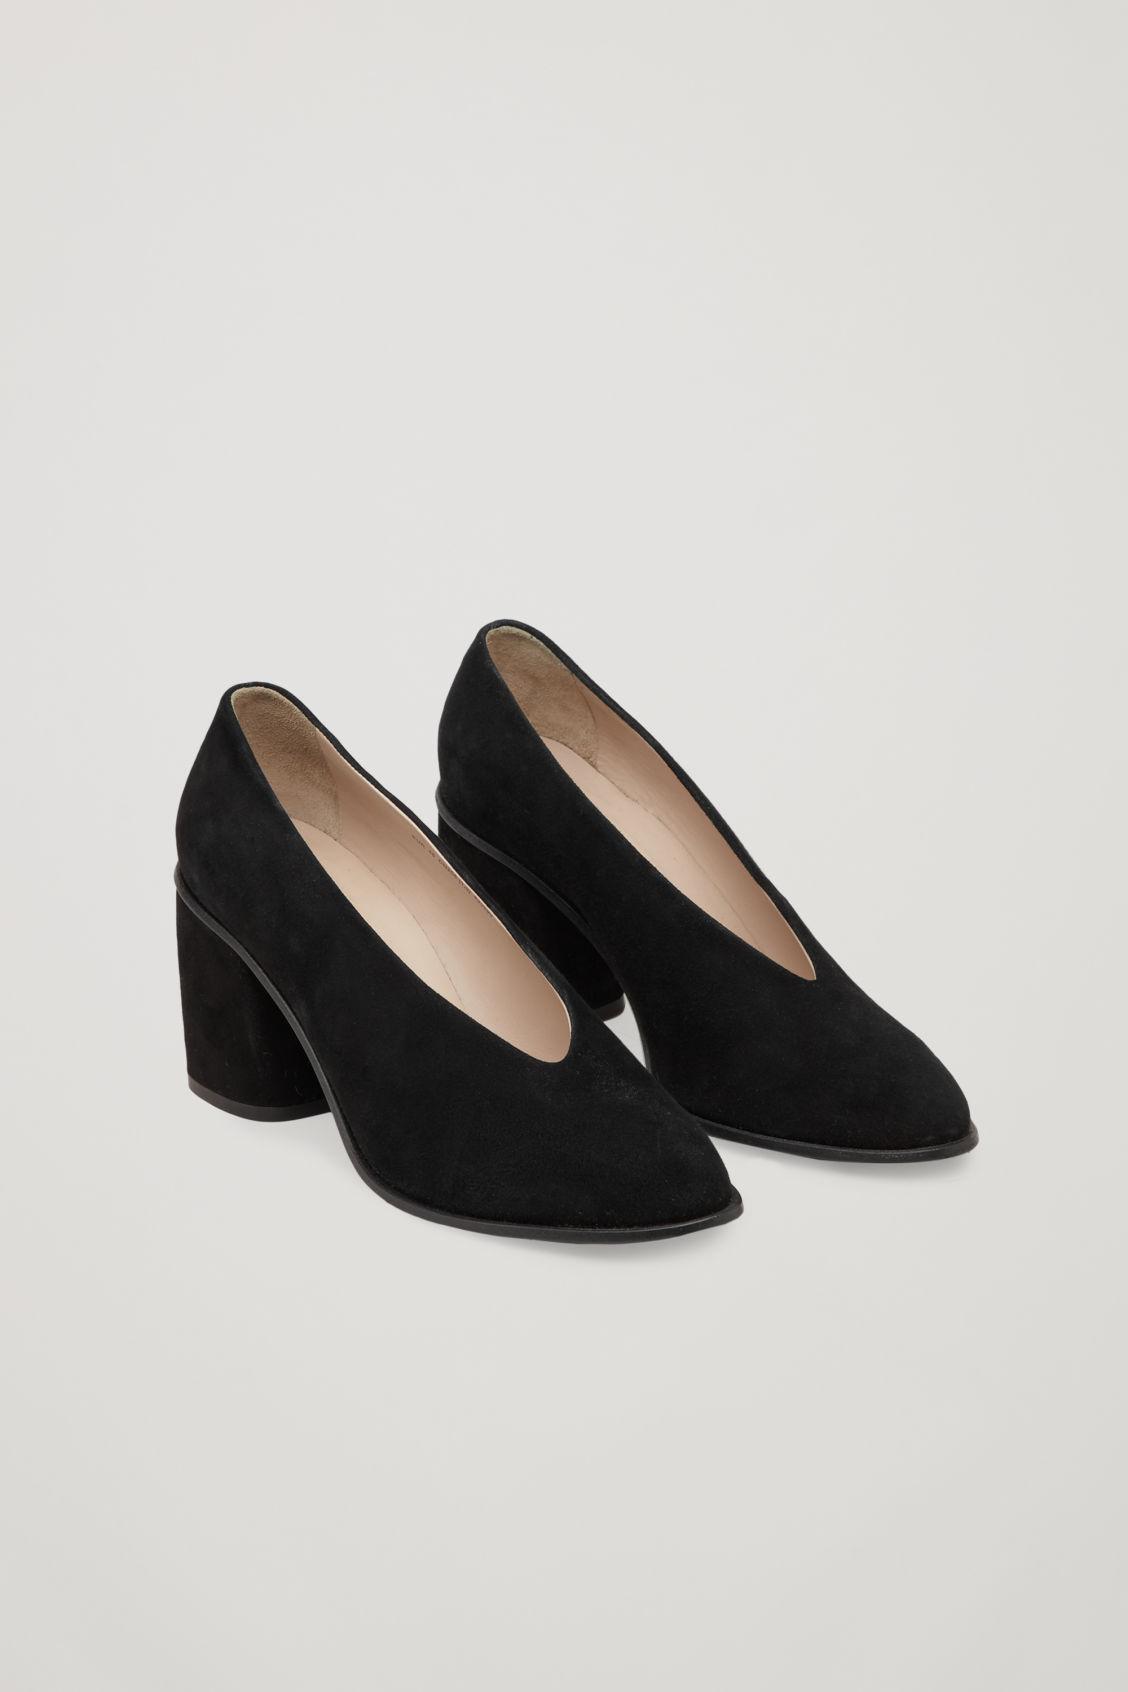 COS Suede Chunky Pumps in Black - Lyst